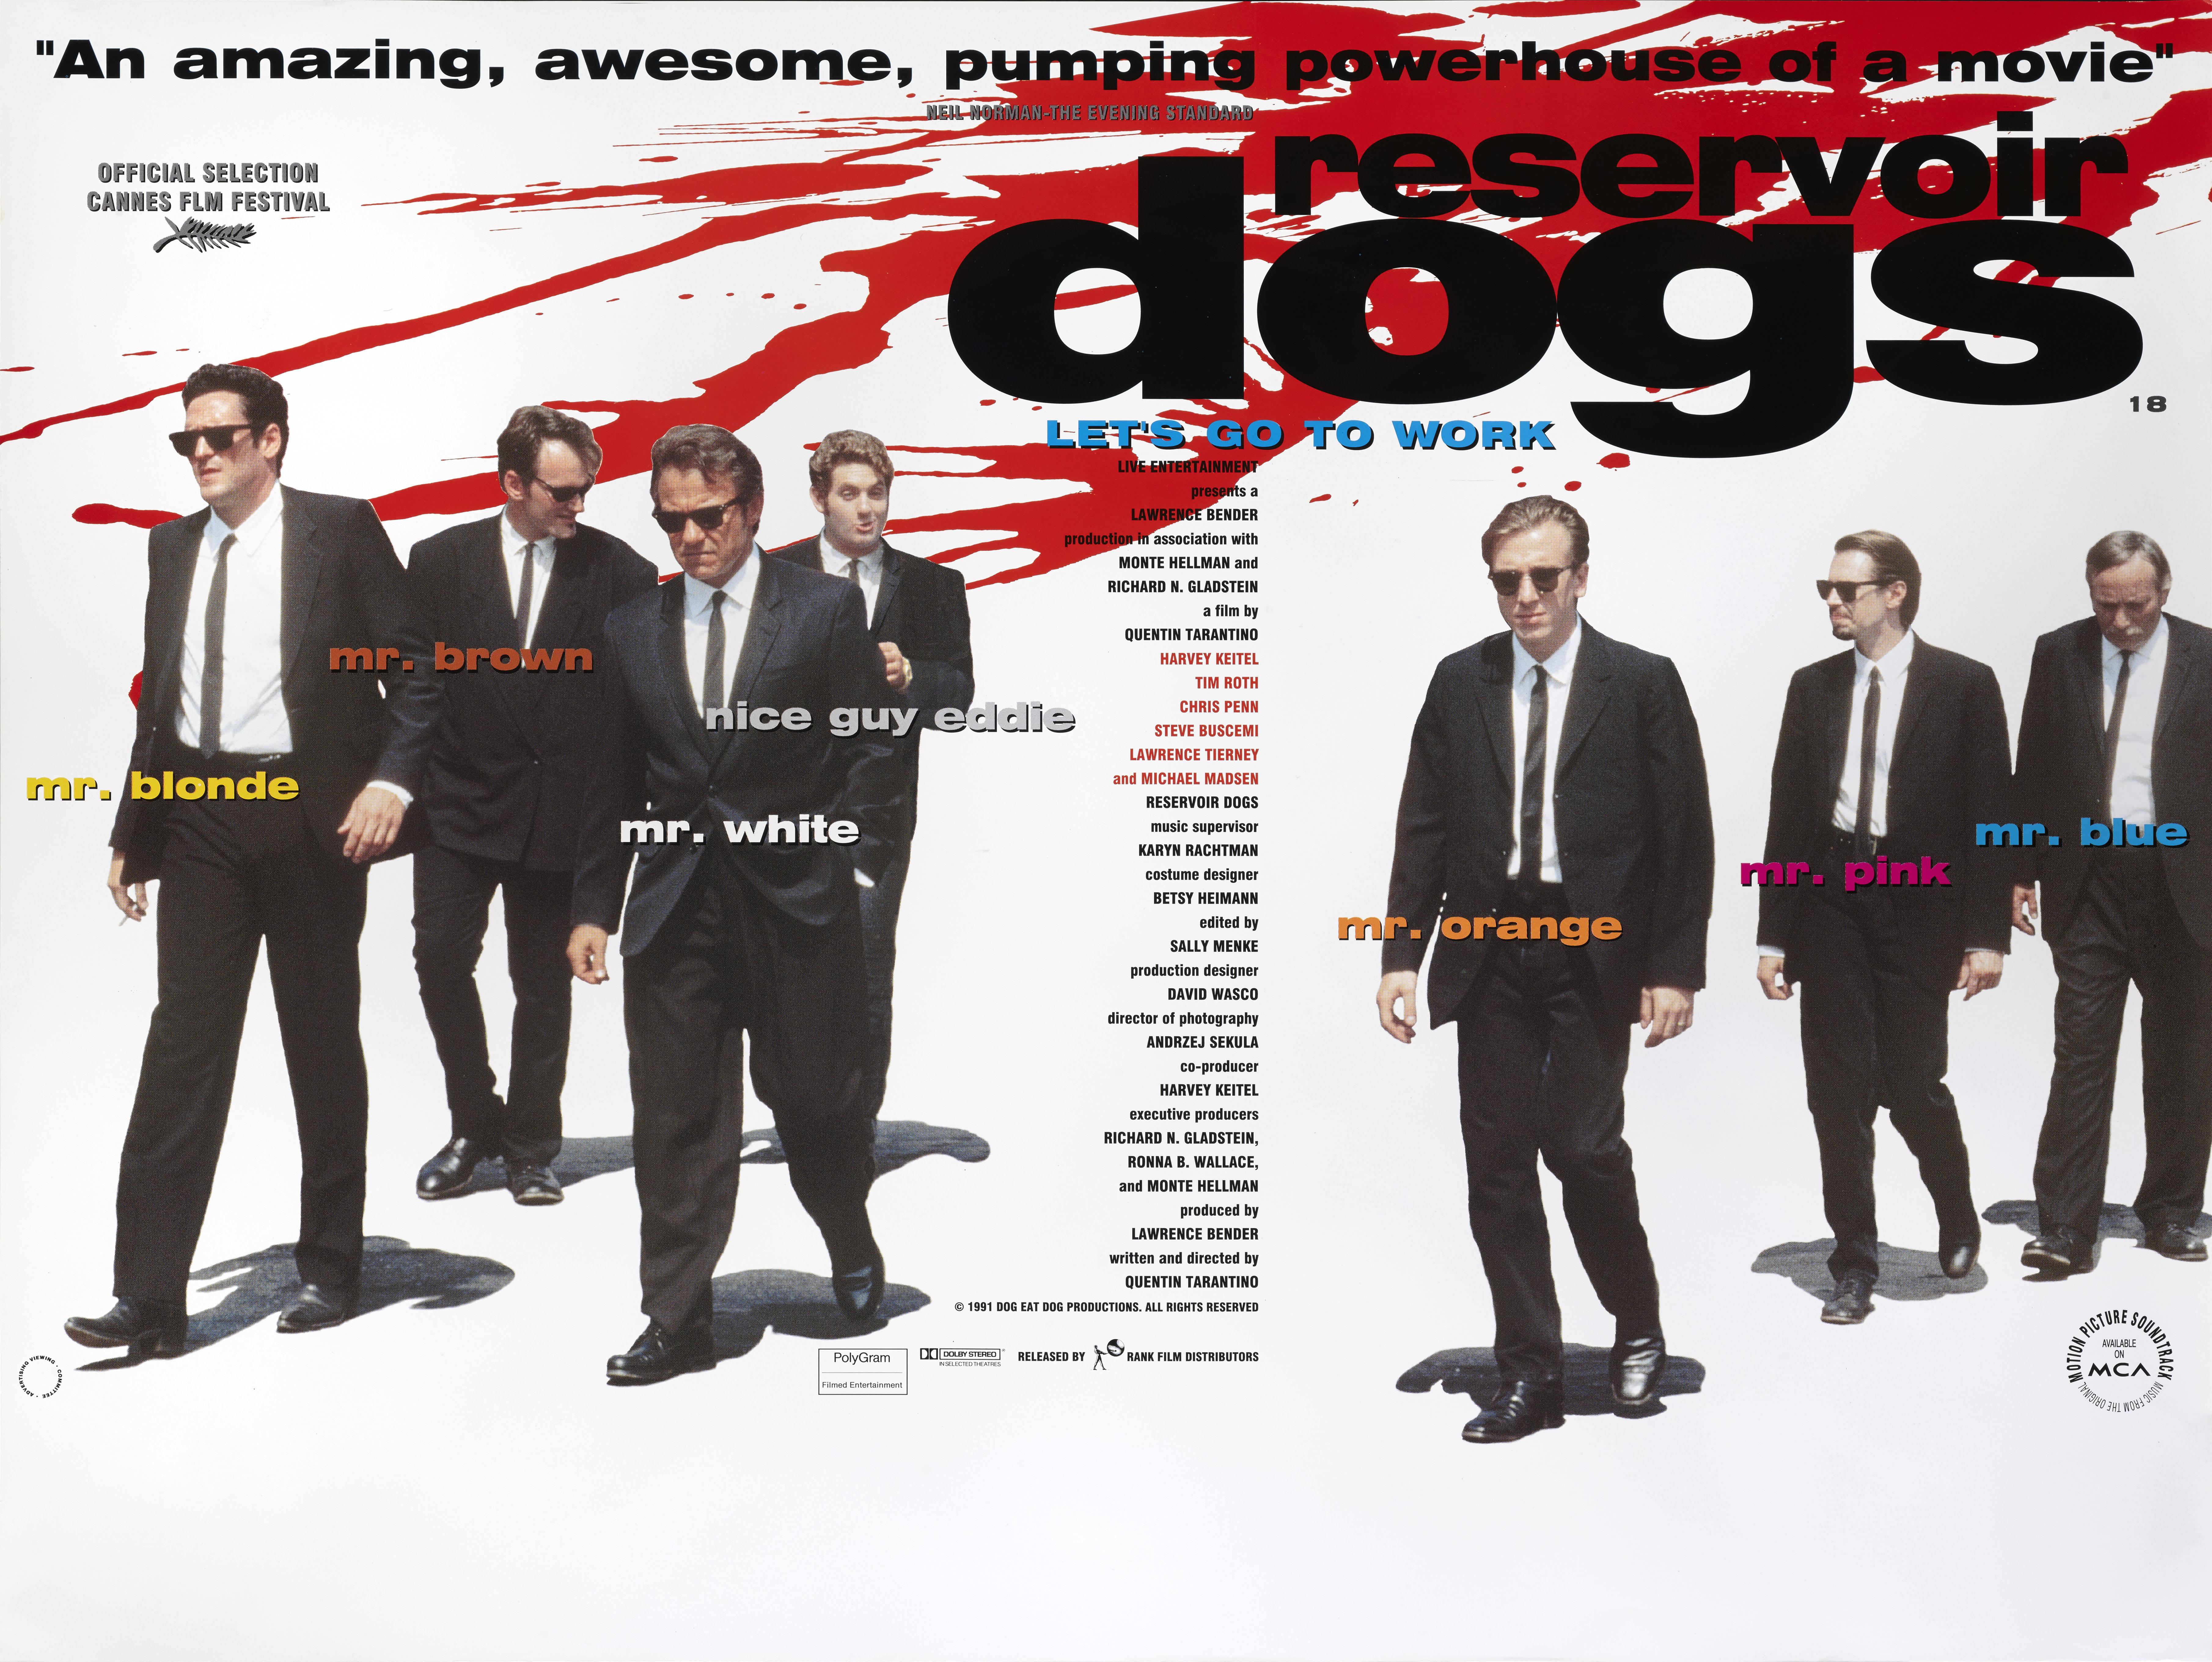 Original British film poster for Quentin Tarantino's first film Reservoir Dogs 1992 .
The film starred Harvey Keitel, Tim Roth, Michael Madsen and Chris Penn and has become a true cult classic.
This poster is unfolded and double-sided and it would